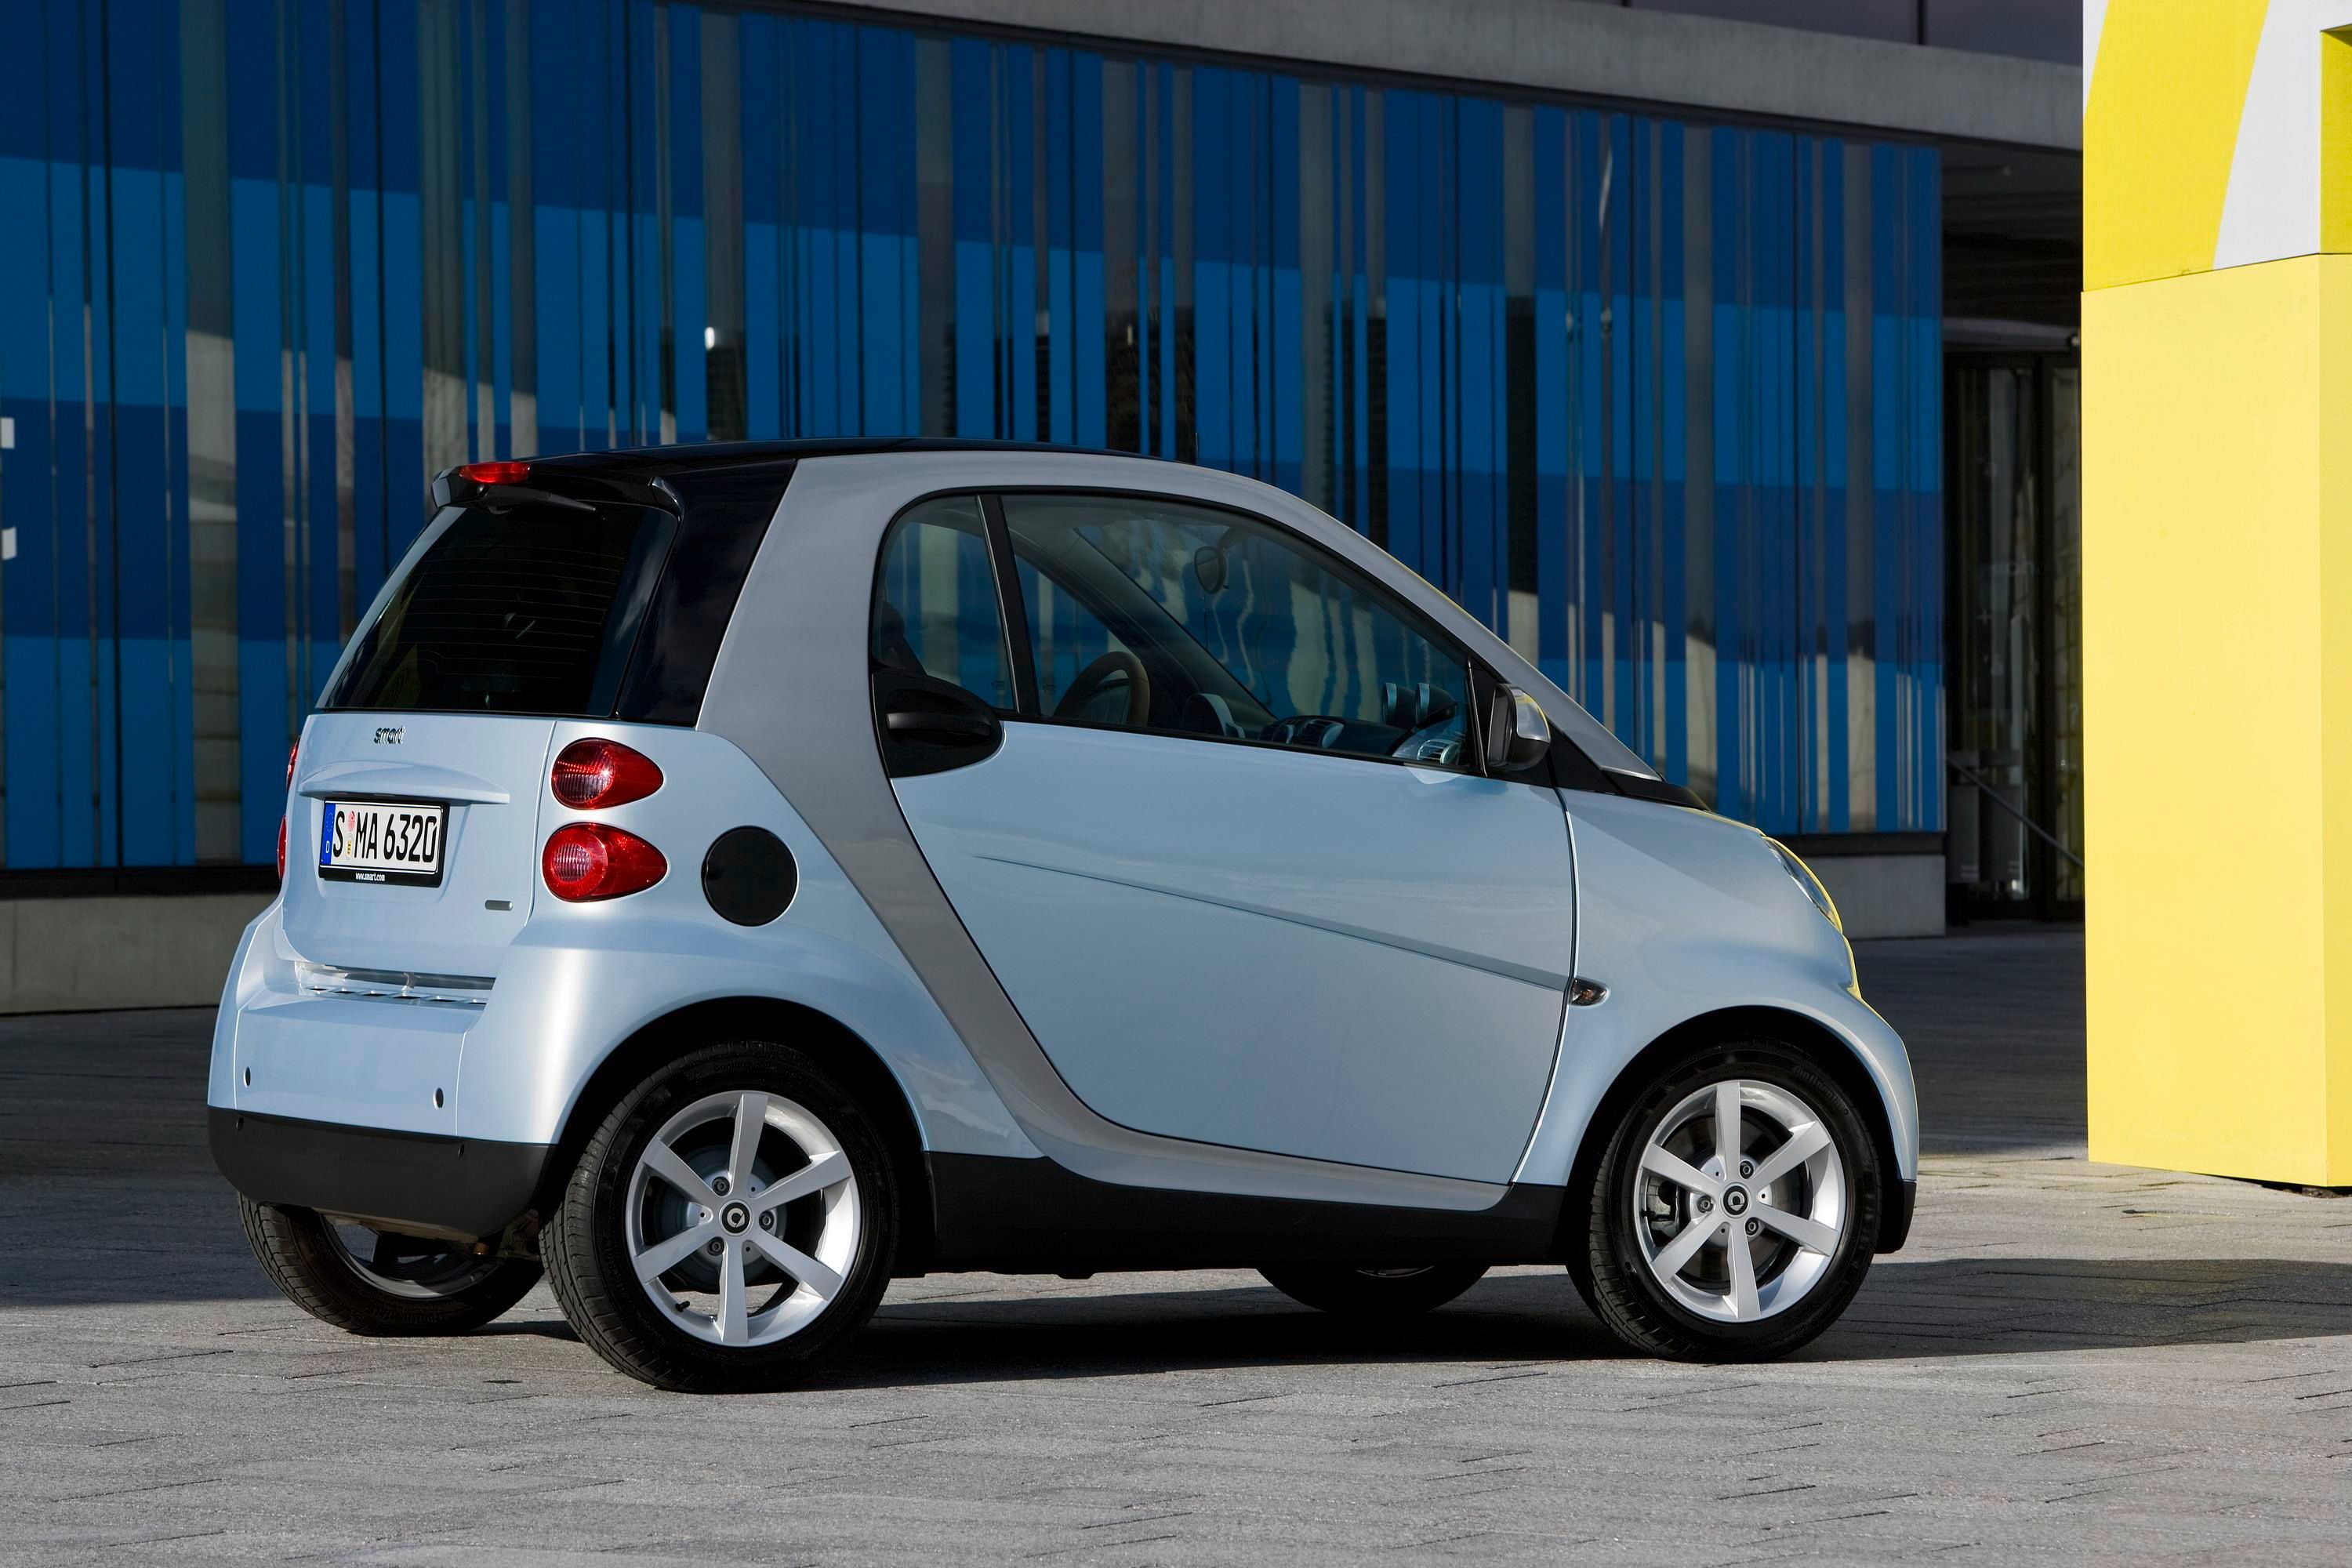 2008 Smart edition limited two